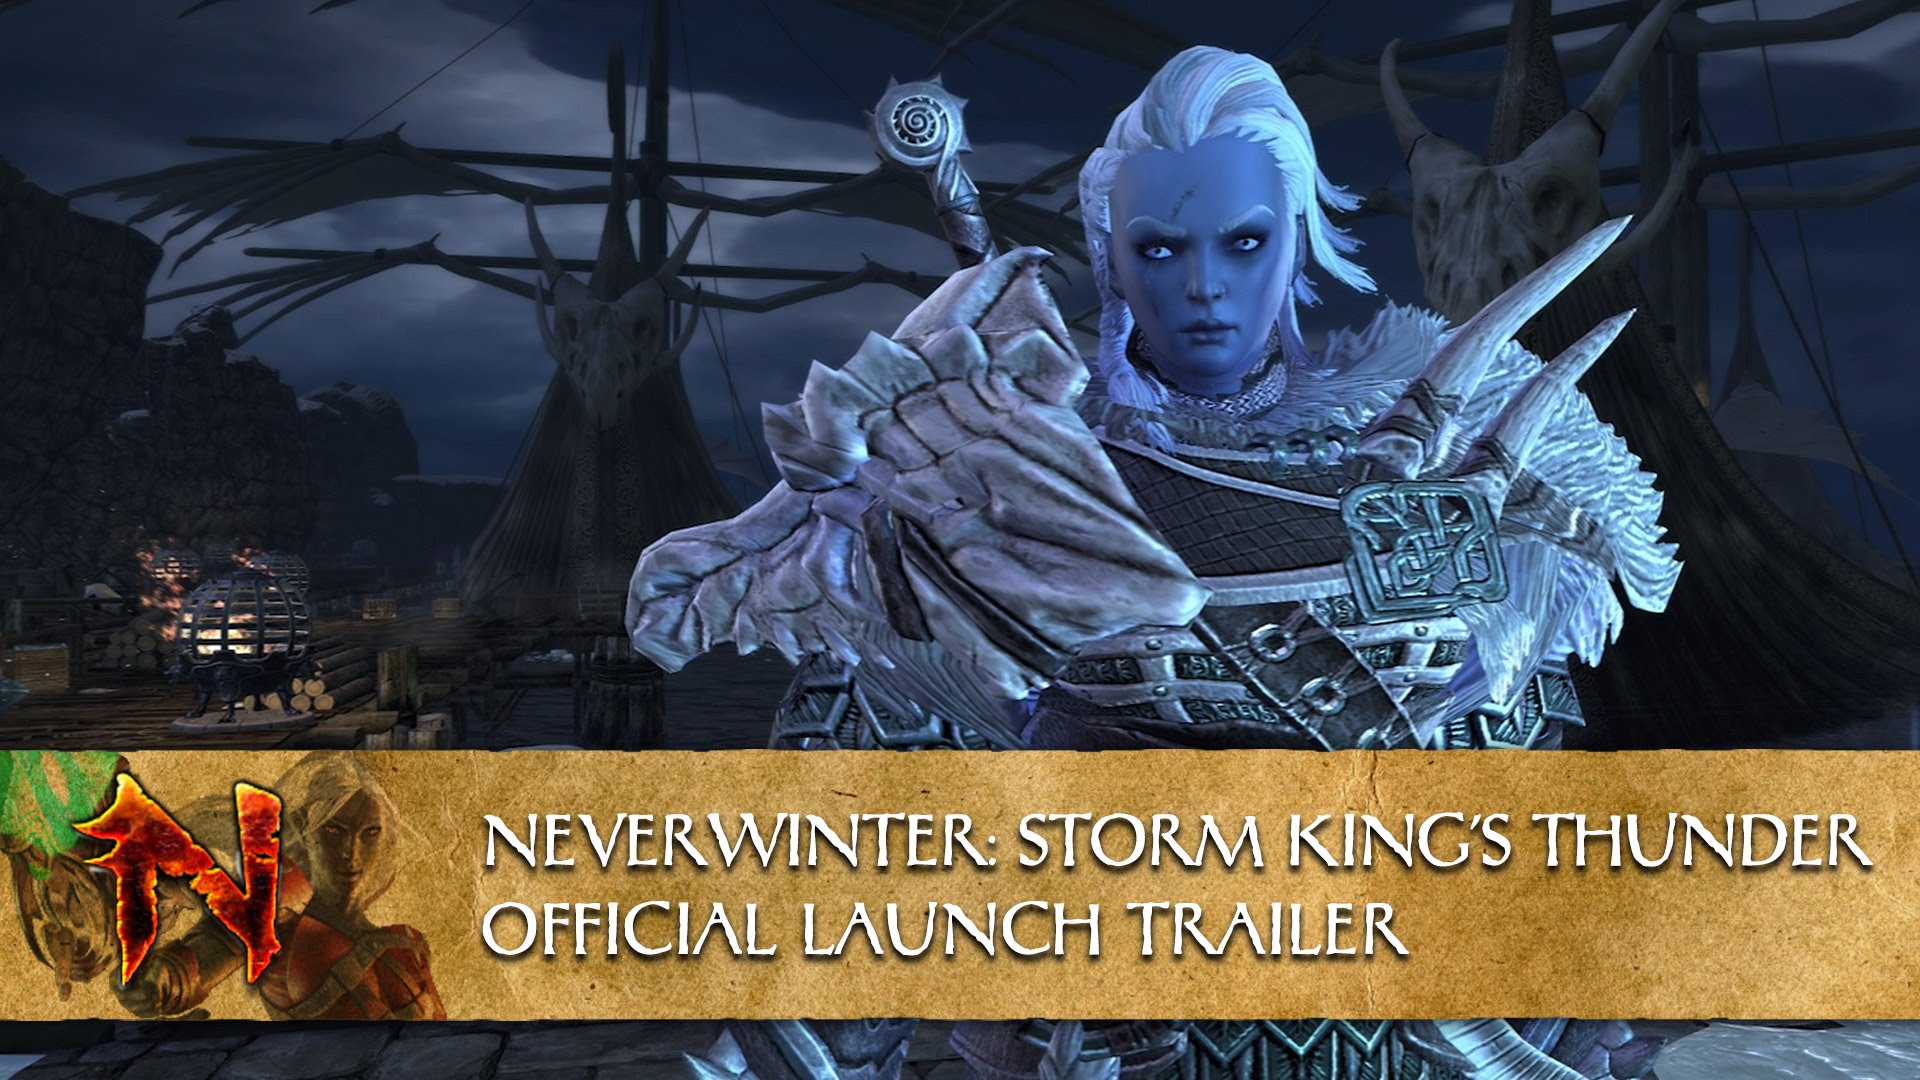 Neverwinter: Storm King's Thunder - Official Launch Trailer